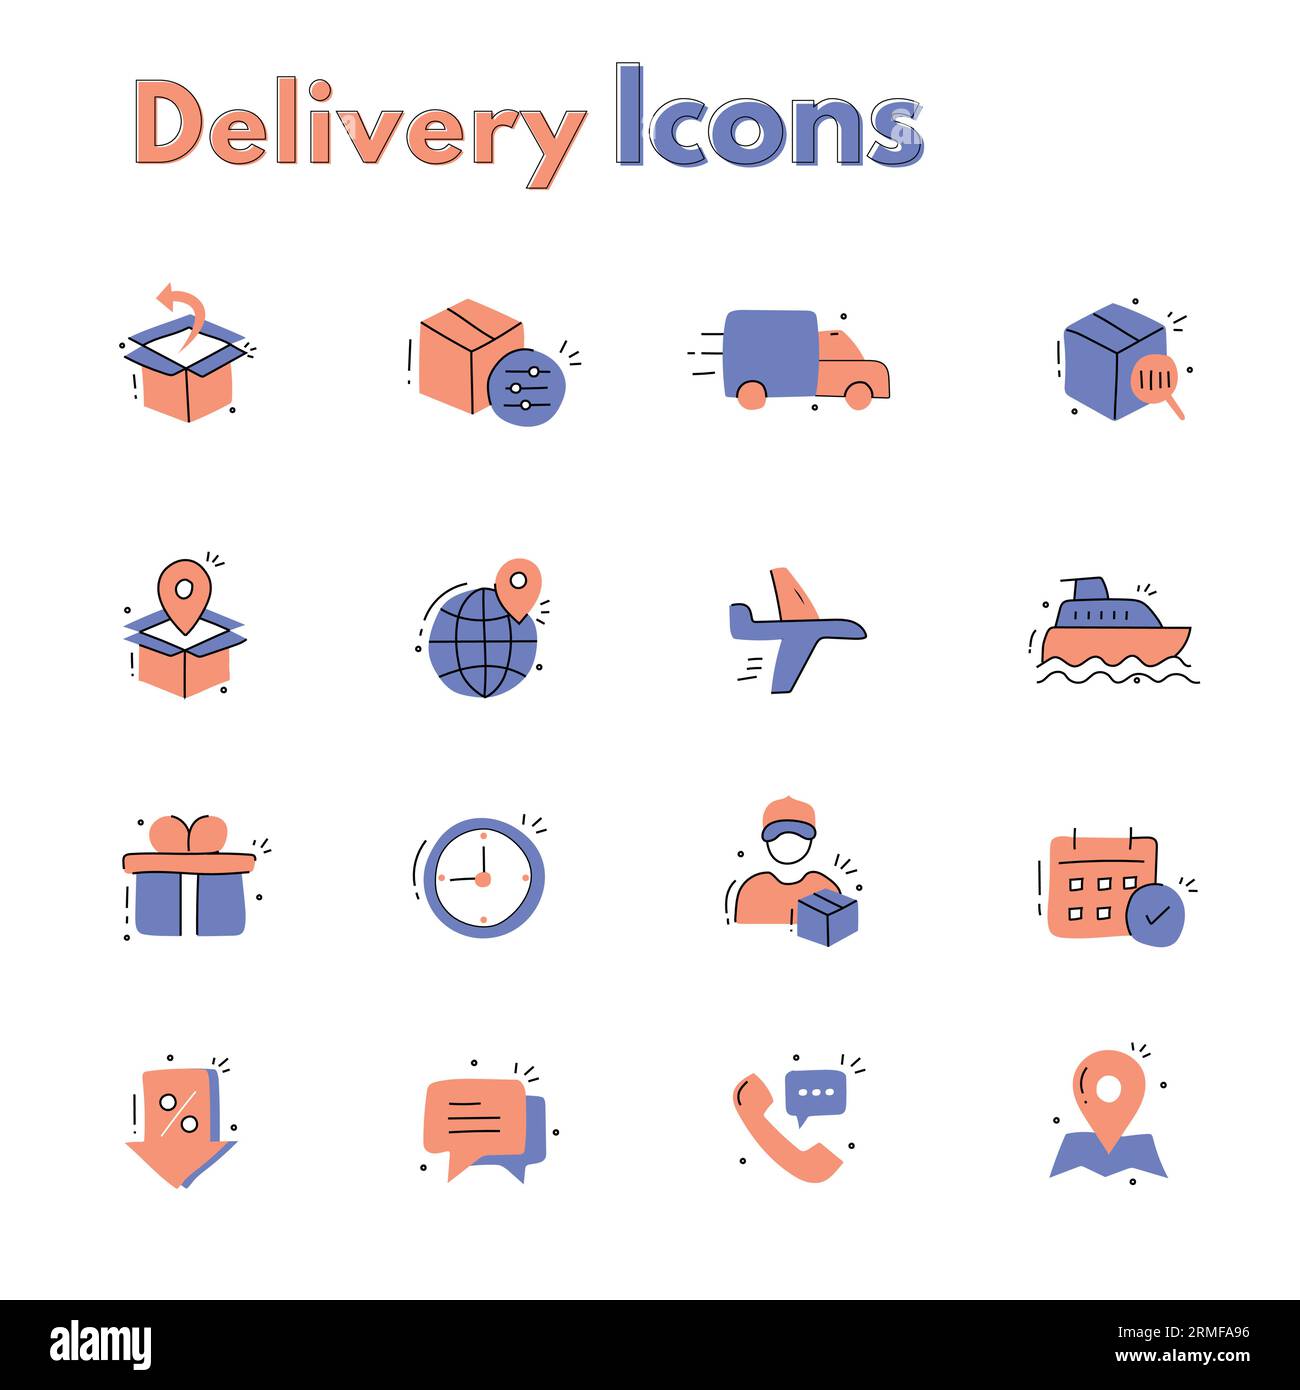 Online shopping delivery icons, E-commerce shipping icons, Order fulfillment icons, Package delivery icons, Shopping cart delivery icons. Stock Vector